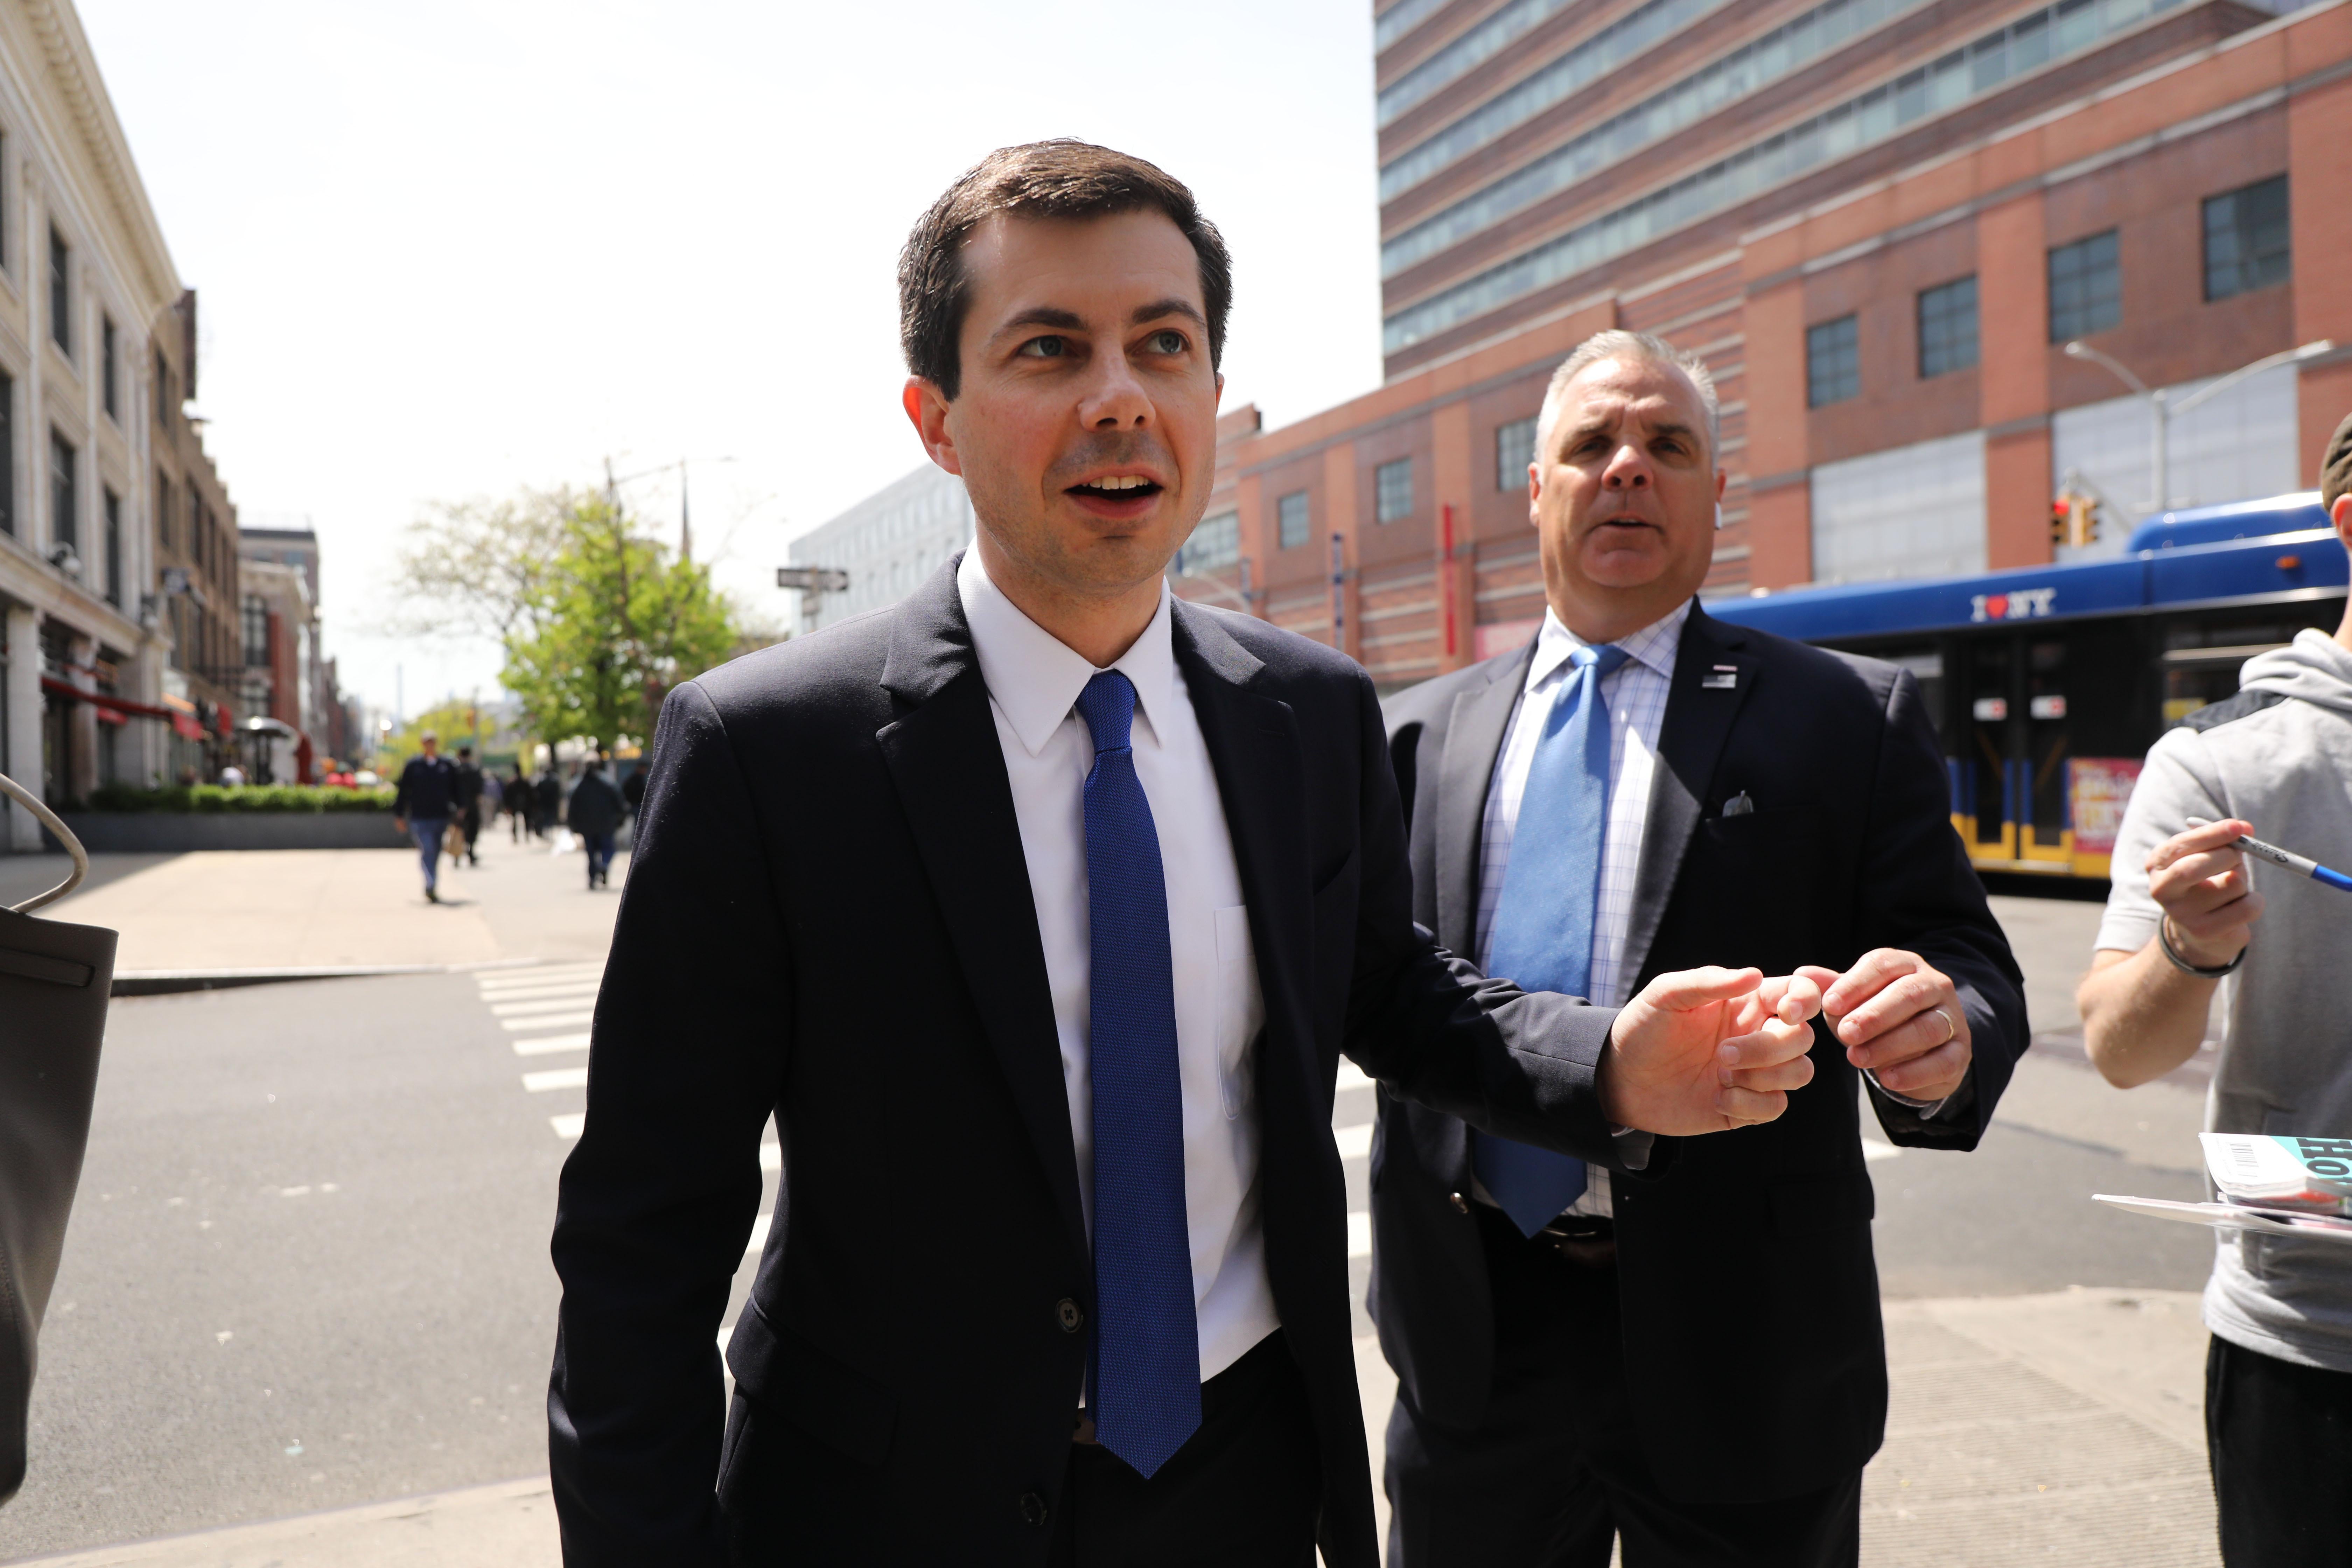 NEW YORK, NEW YORK - APRIL 29: 2020 Democratic presidential candidate and South Bend, Indiana, Mayor Pete Buttigieg meets with Reverend Al Sharpton for lunch at famed Sylvia’s Restaurant in Harlem on April 29, 2019 in New York City. The two were scheduled to speak about African American outreach and the need to confront homophobia among other issues. (Photo by Spencer Platt/Getty Images)